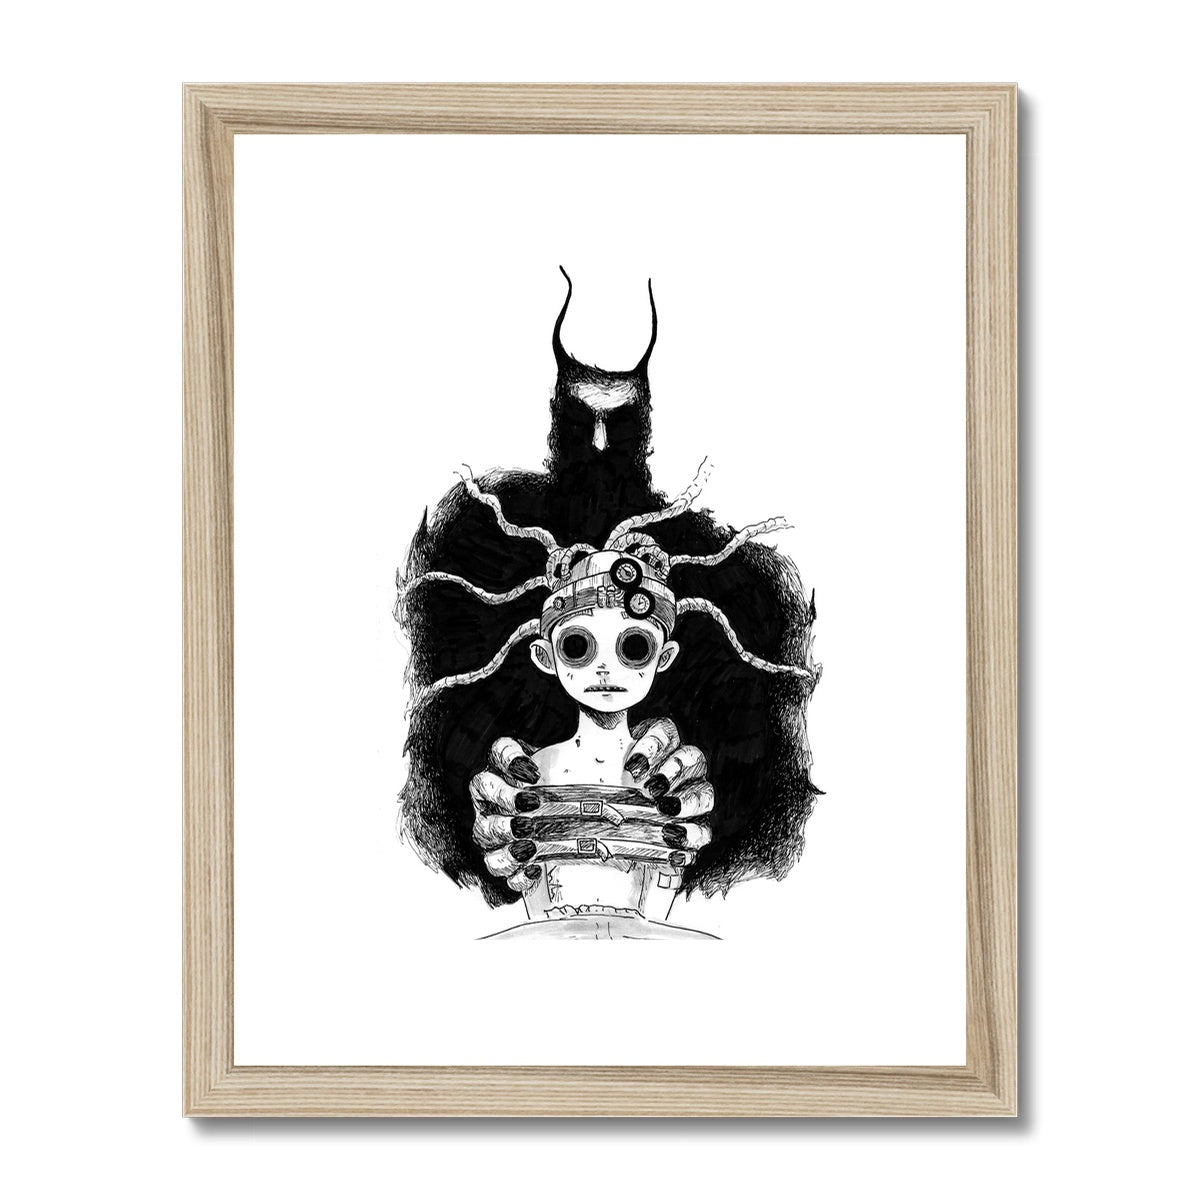 Chained Framed & Mounted Print.